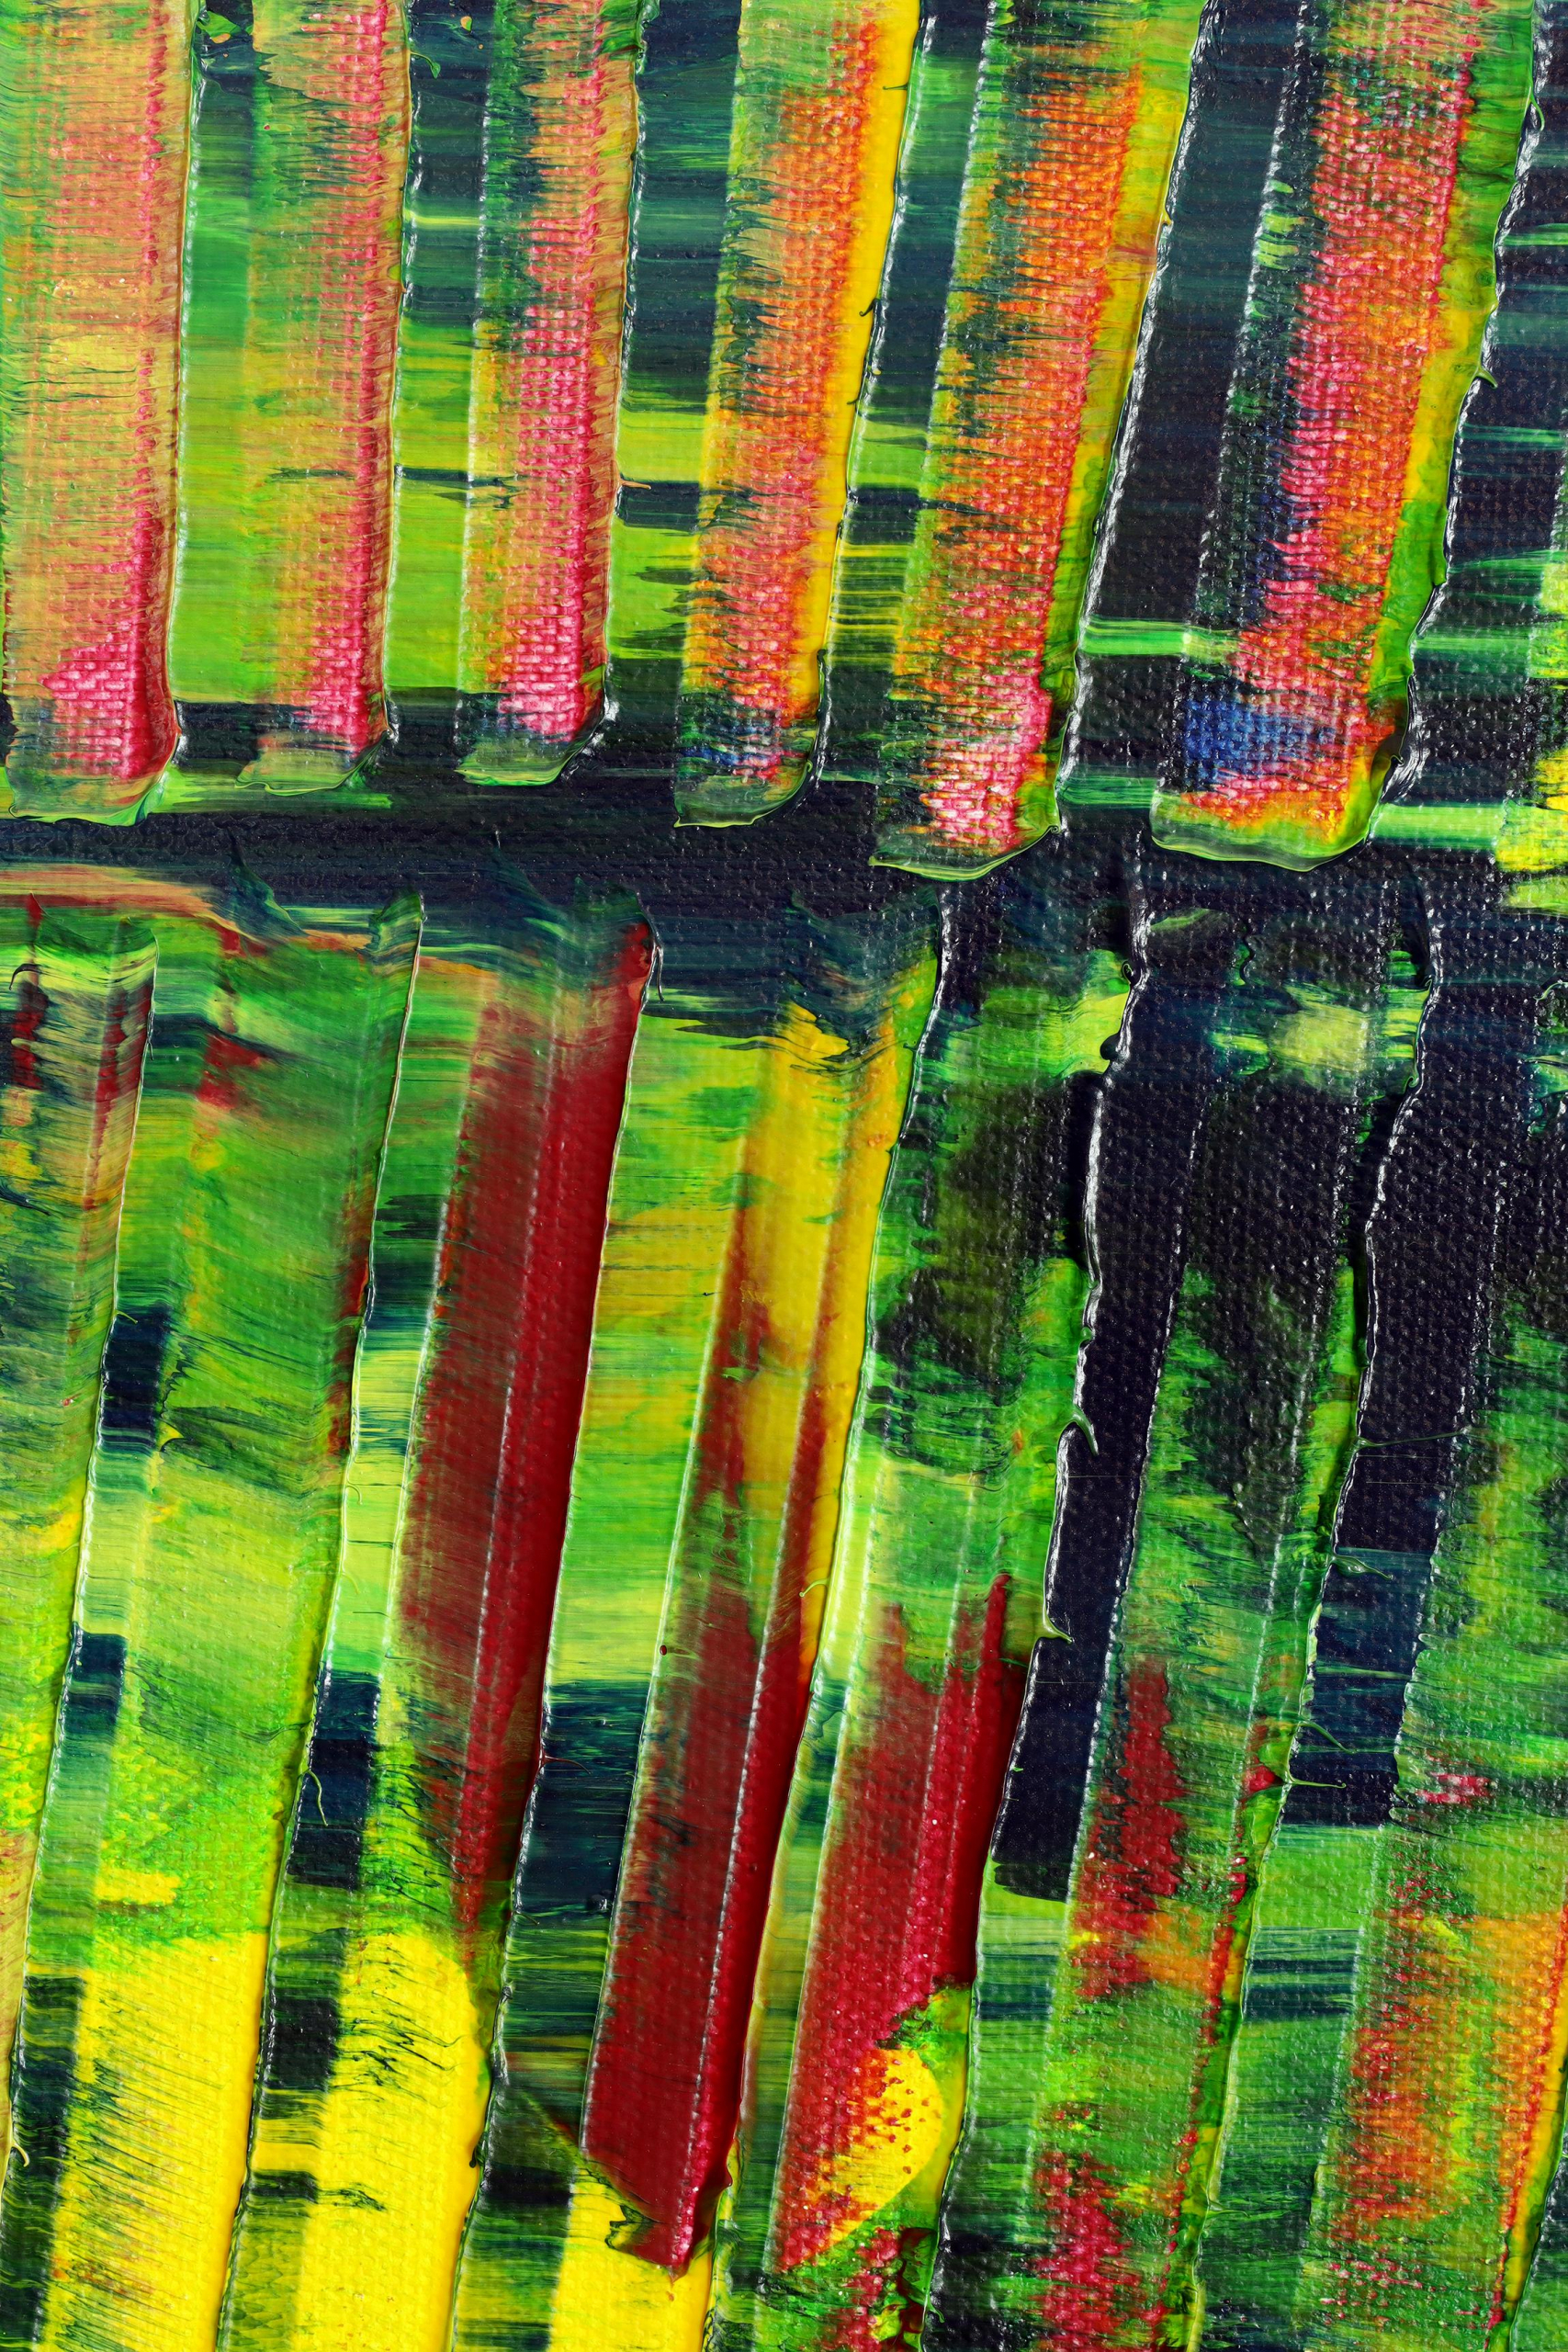 DETAIL / A Forest Song 6 (Faces of Green) (2022) / 24x36 inches